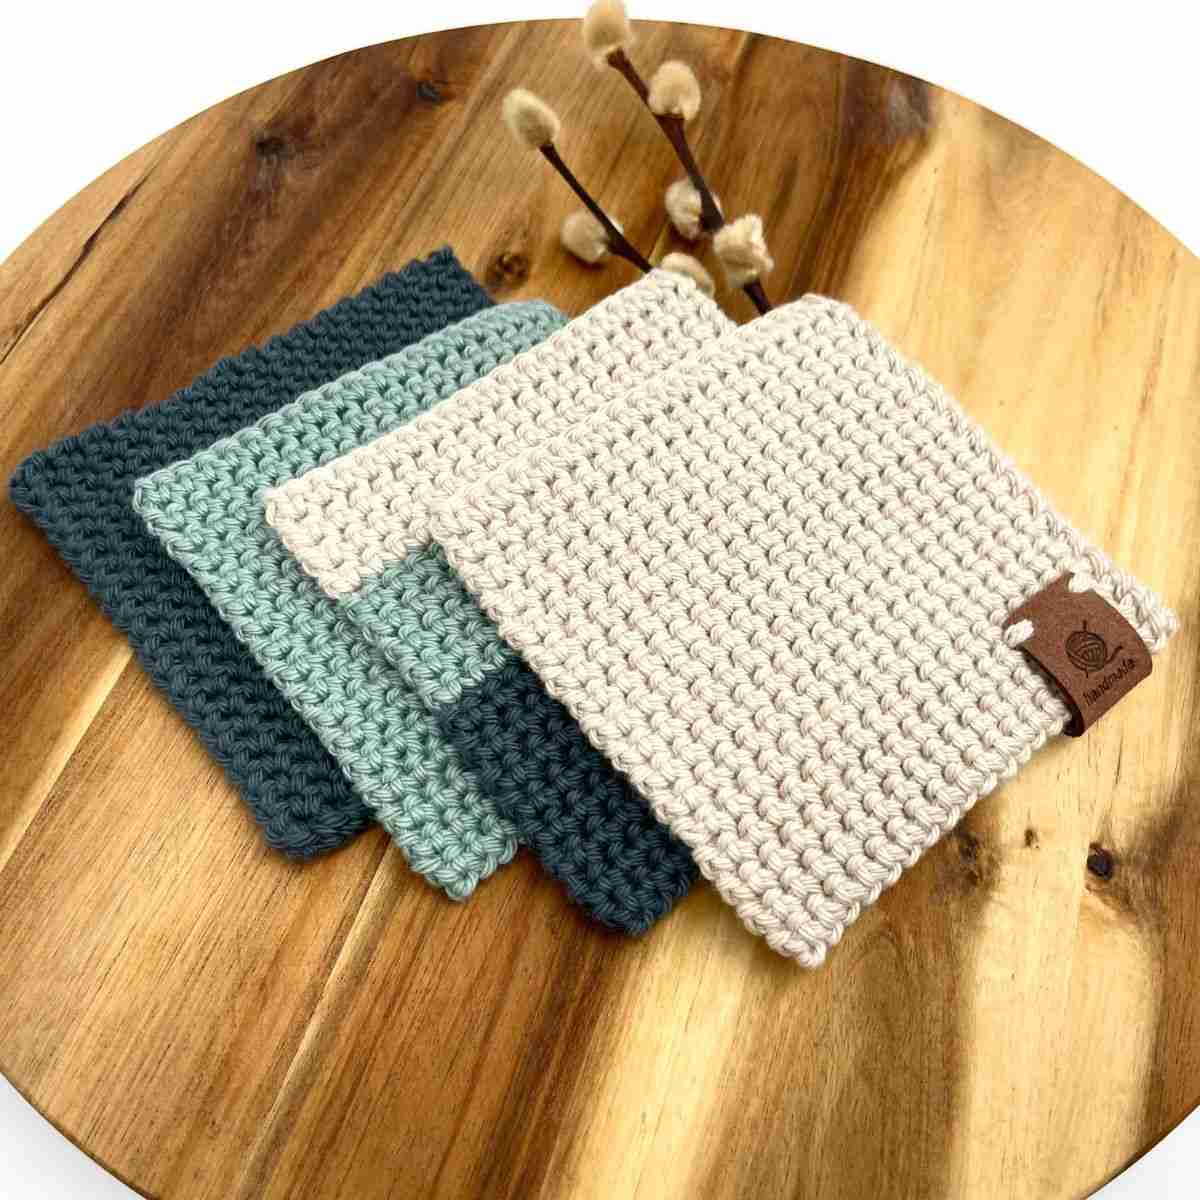 Free and easy square crochet coaster pattern